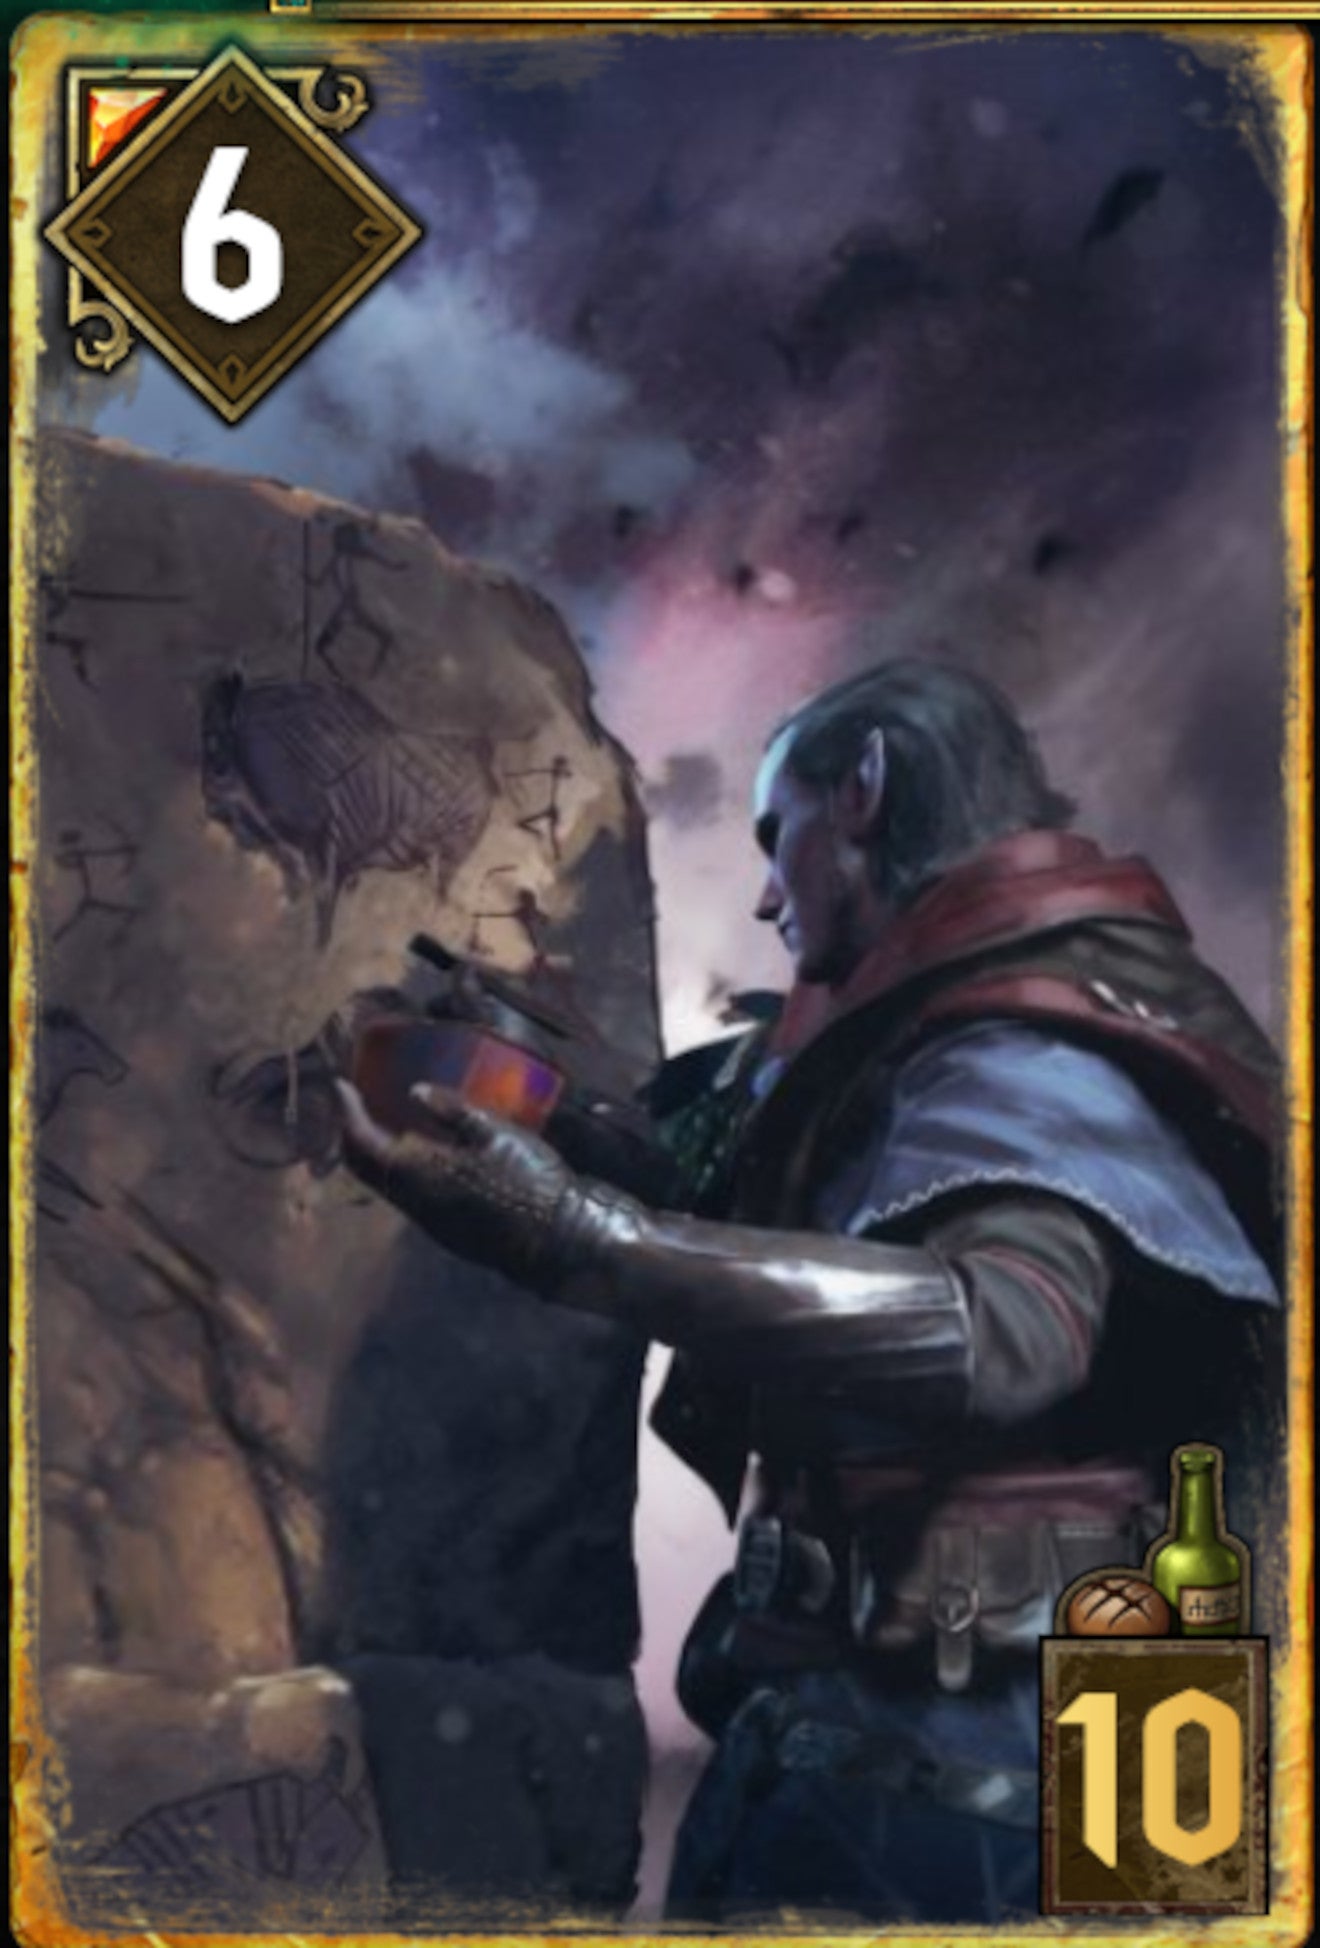 Card featuring Avallac'h from Gwent card game